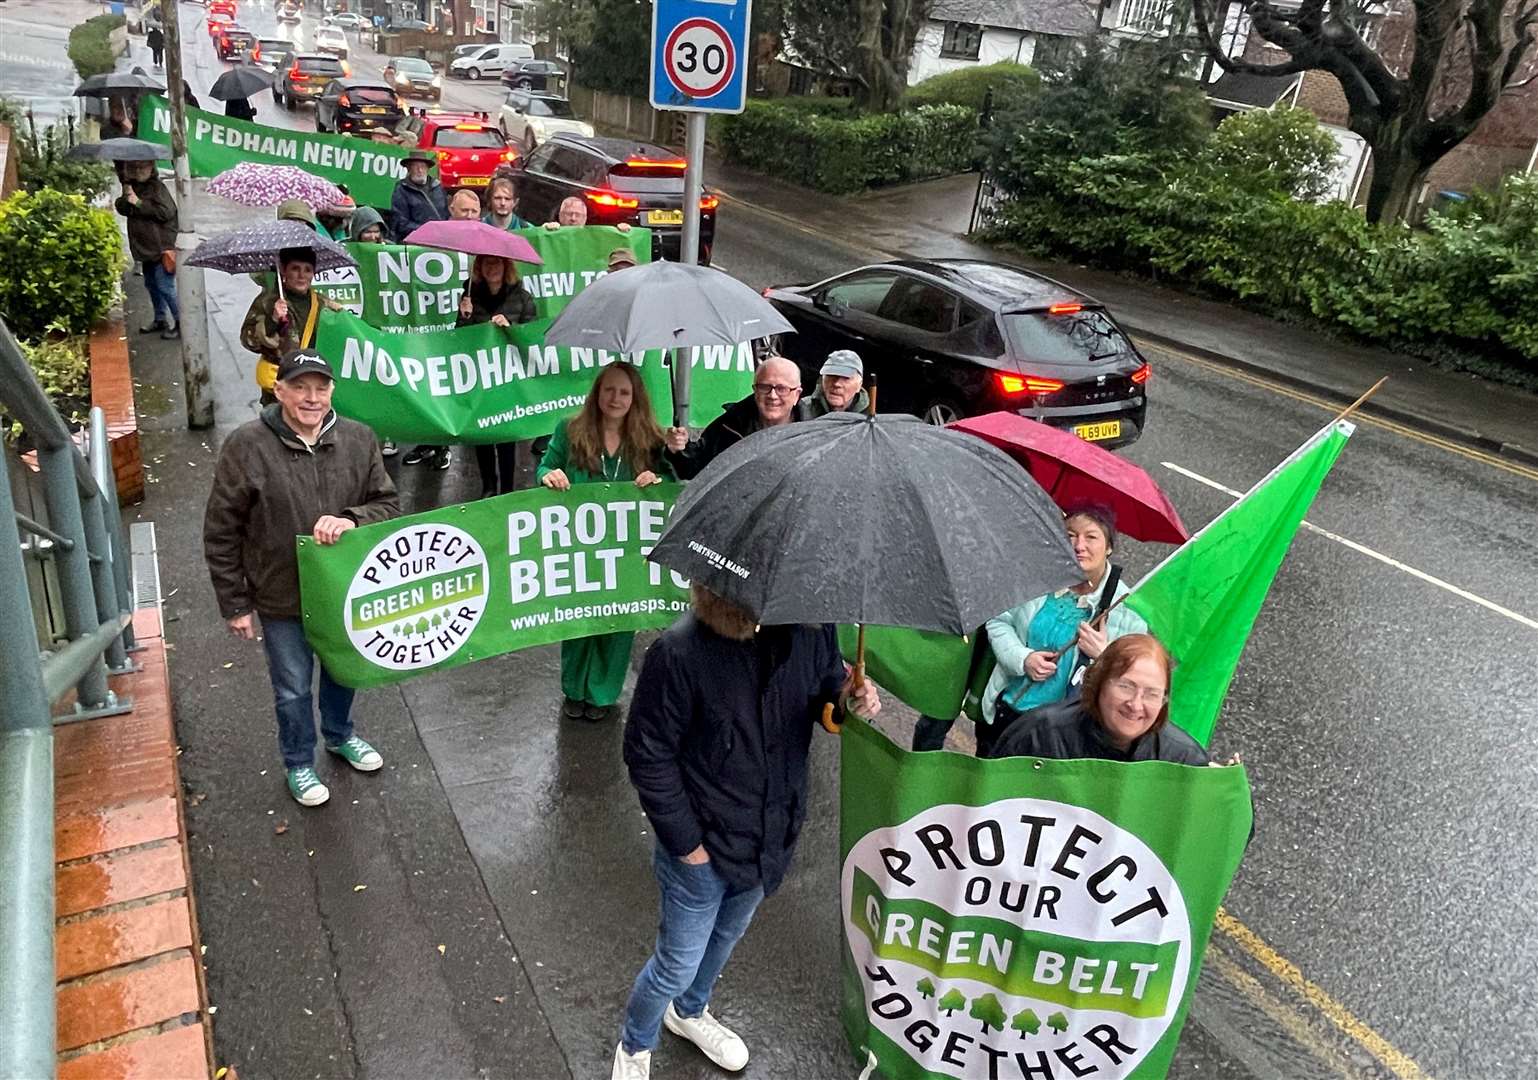 A protest was held over plans to build a 2,500 home garden village at Pedham Place golf course. Photo: Protect The Green Belt Together